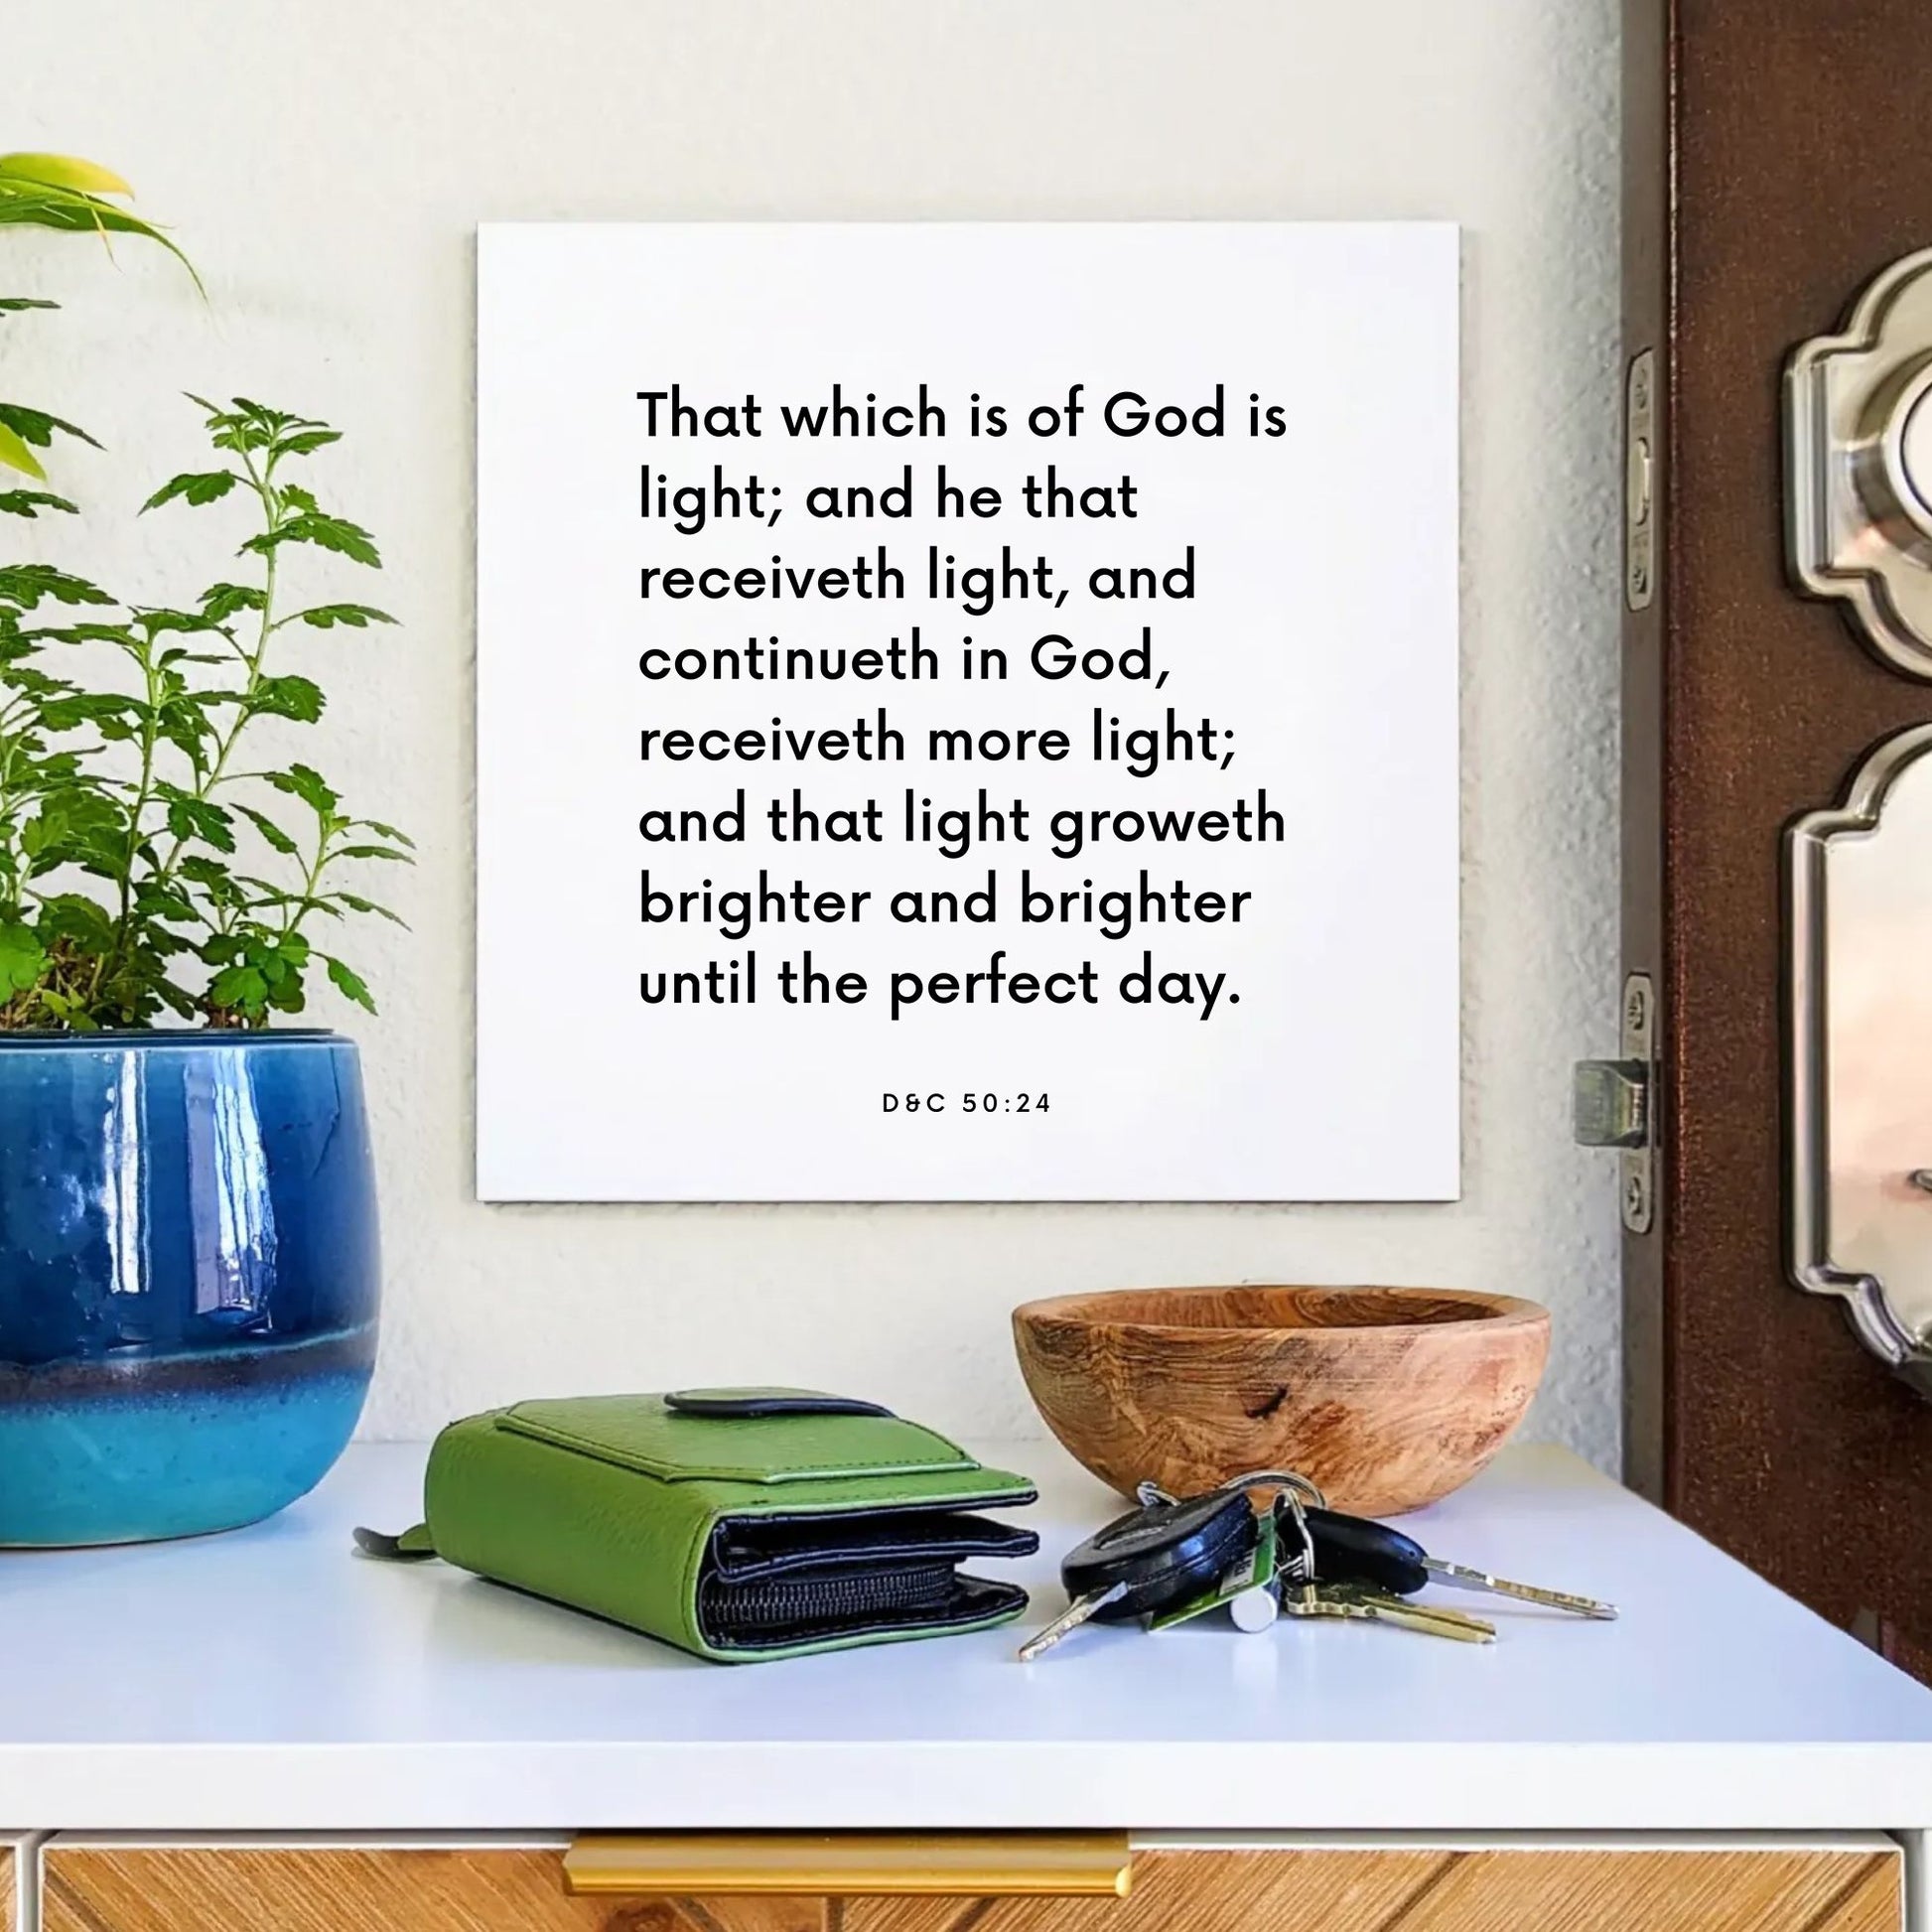 Entryway mouting of the scripture tile for D&C 50:24 - "That which is of God is light"